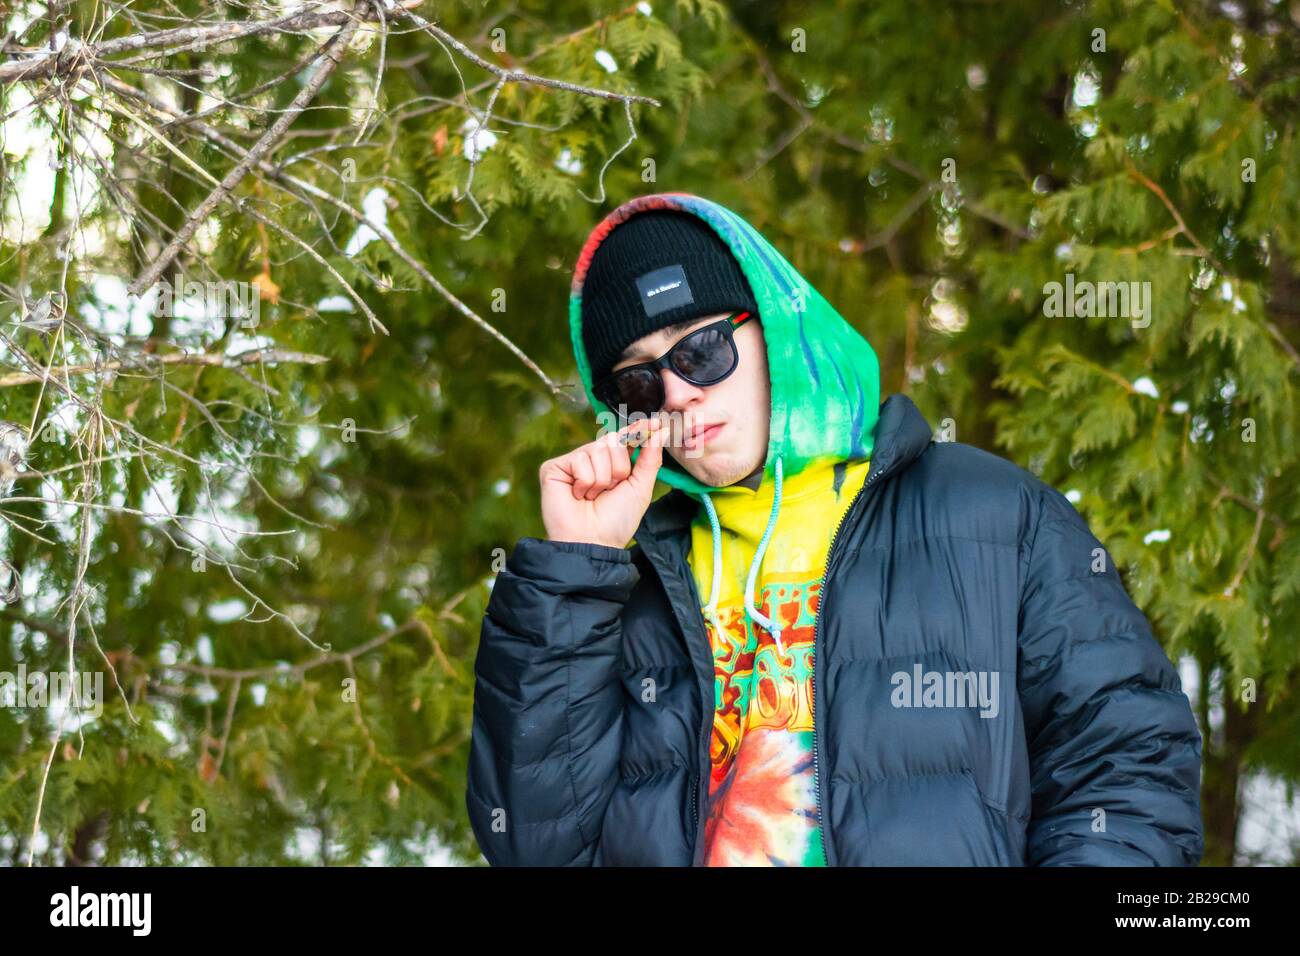 Male model modeling hoody and shirt Stock Photo